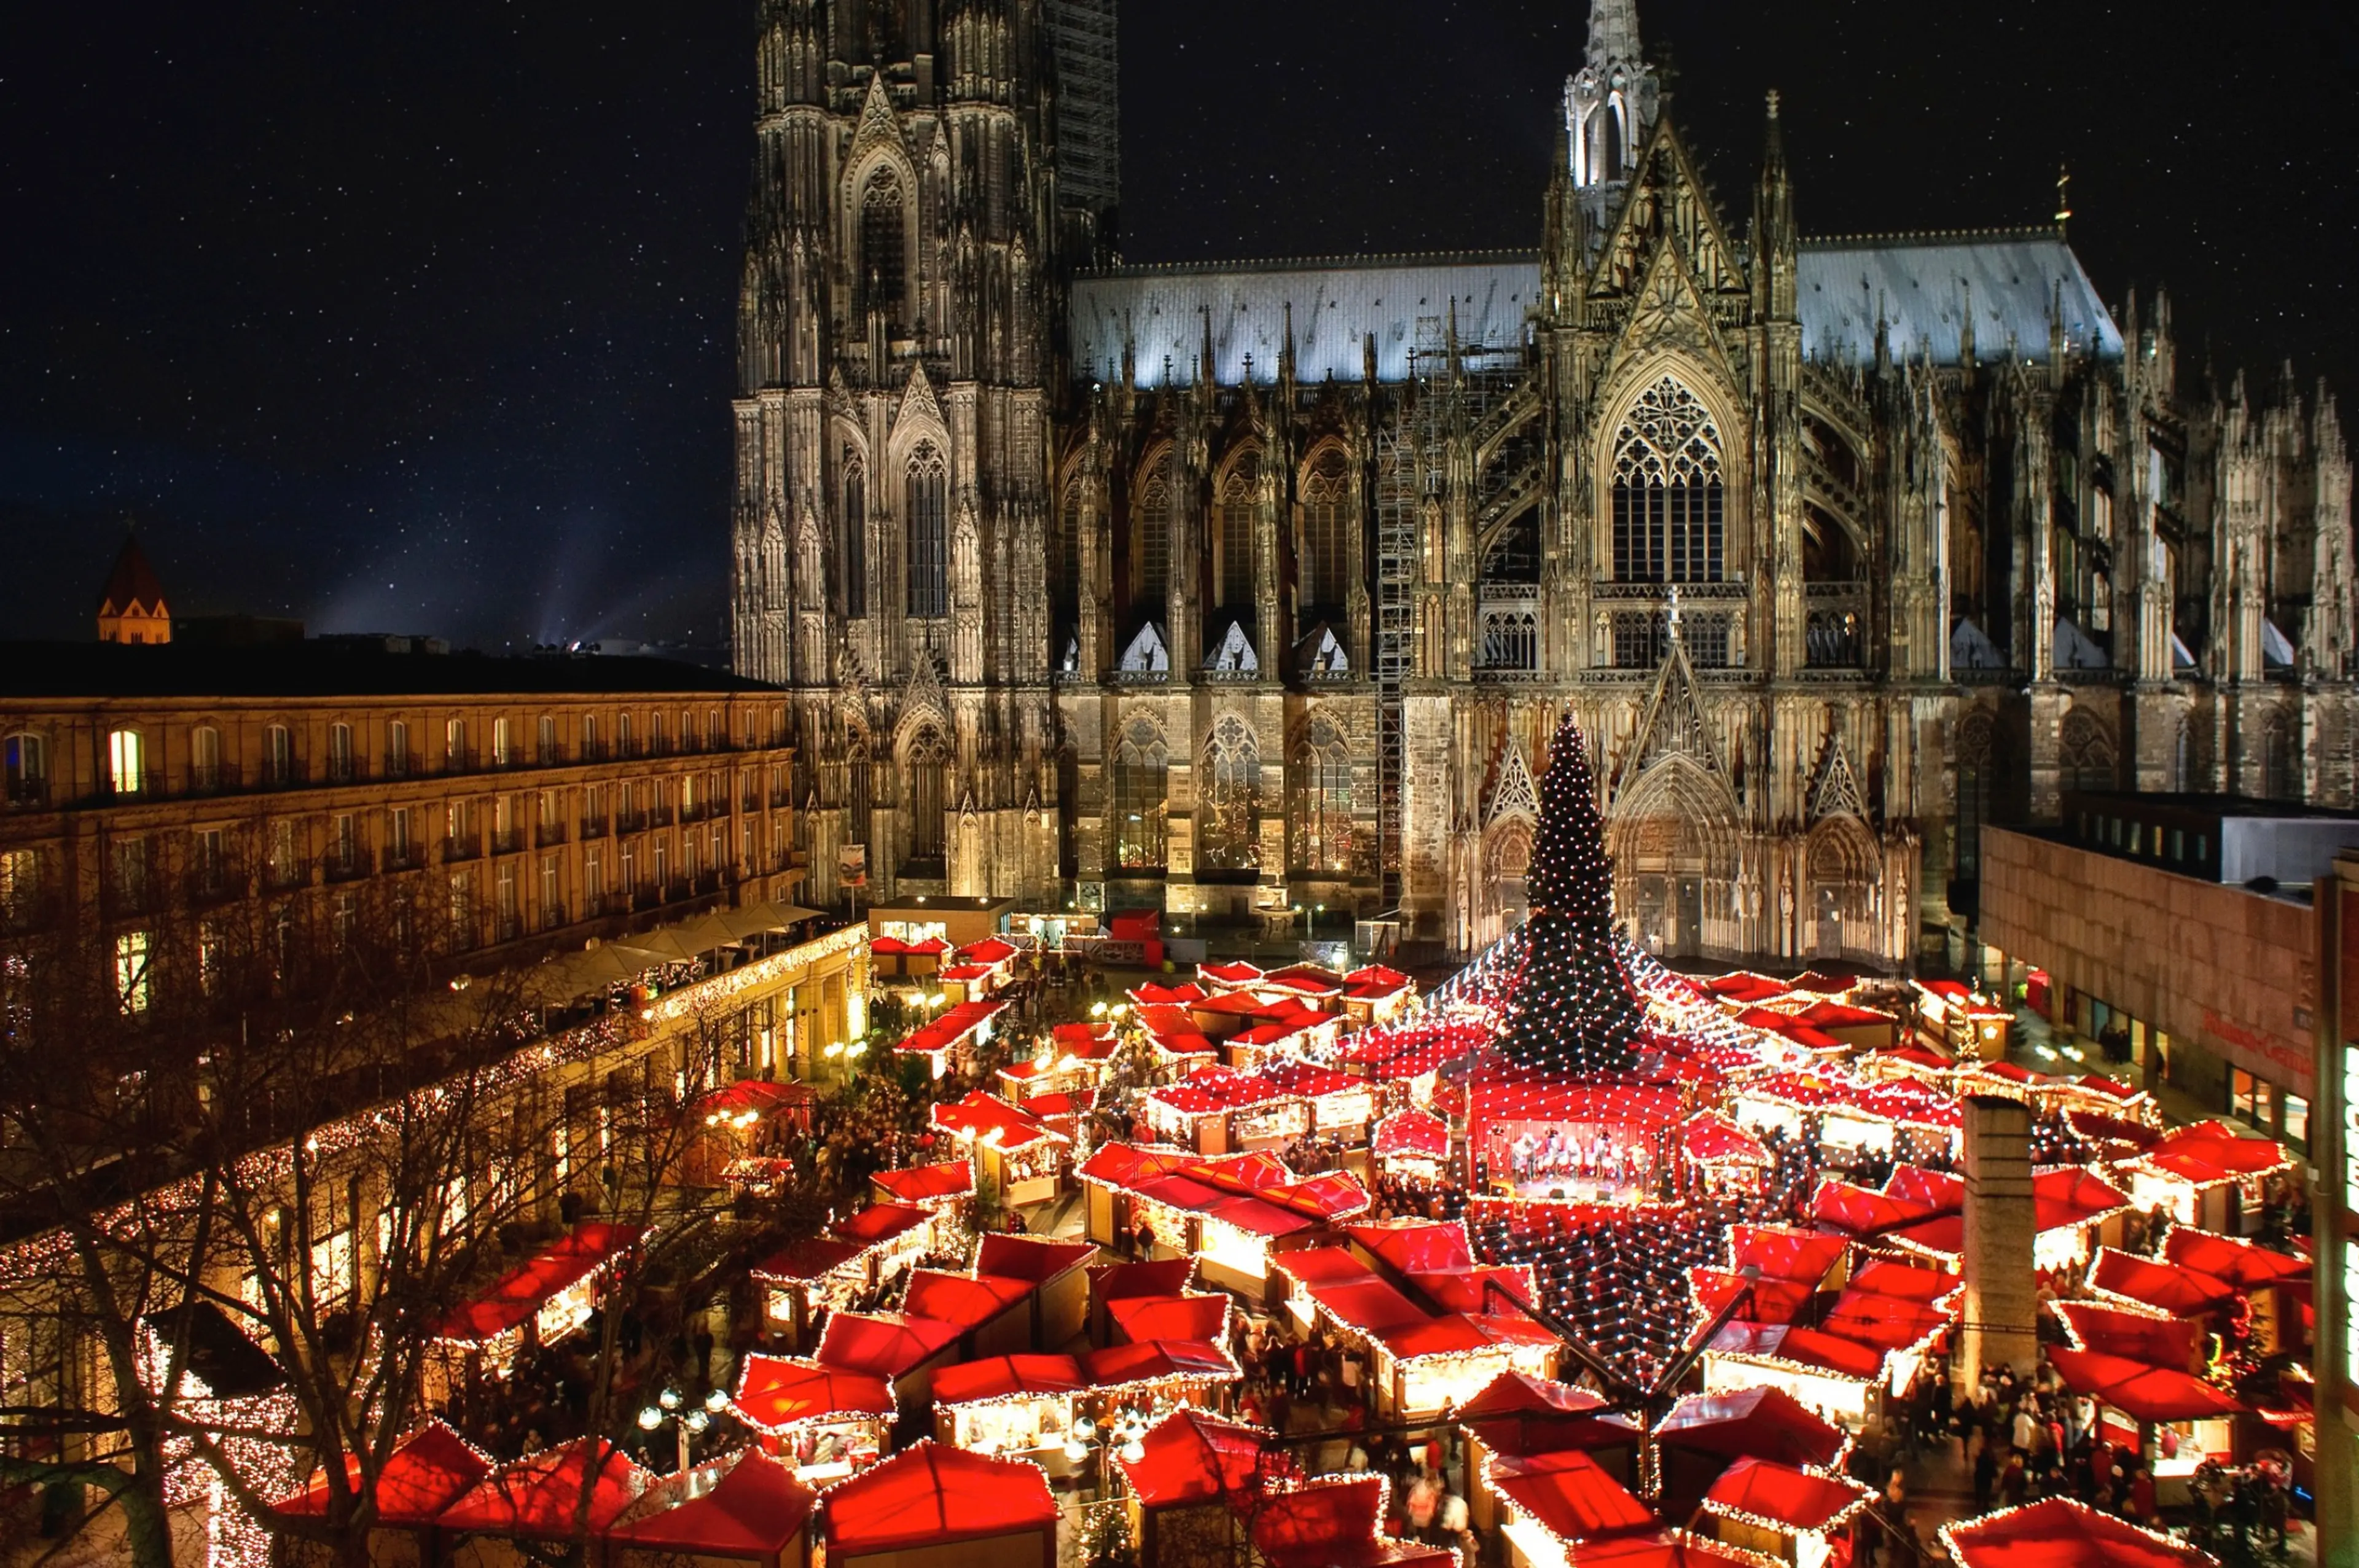 Most famous christmas market near Cologne Cathedral.